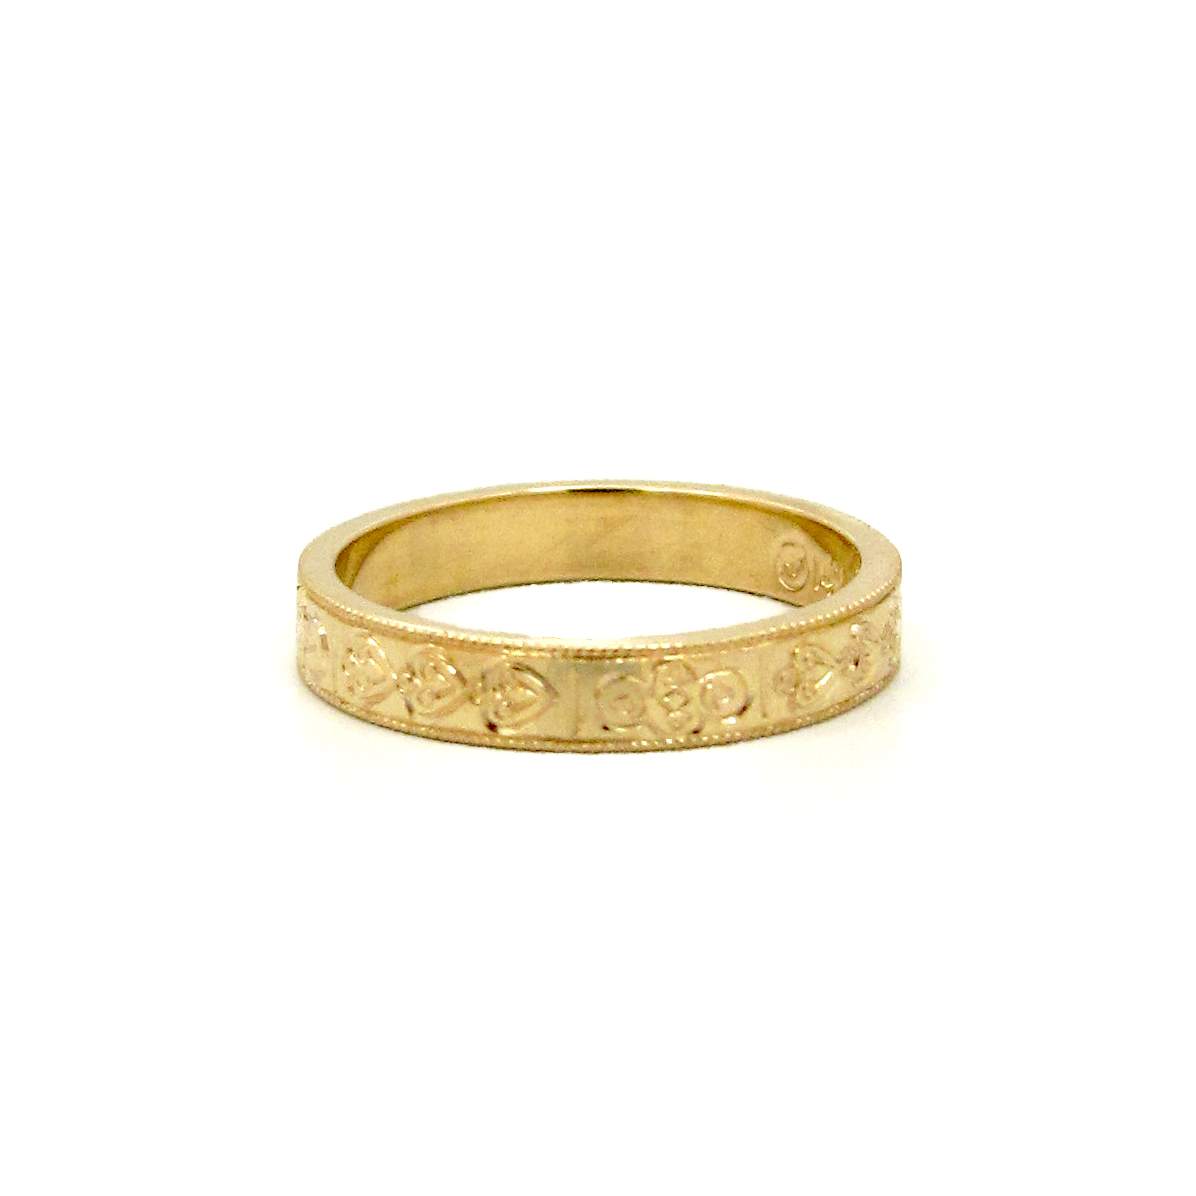 This is a picture of a Custom Engraved 14k Yellow Gold Wedding Band